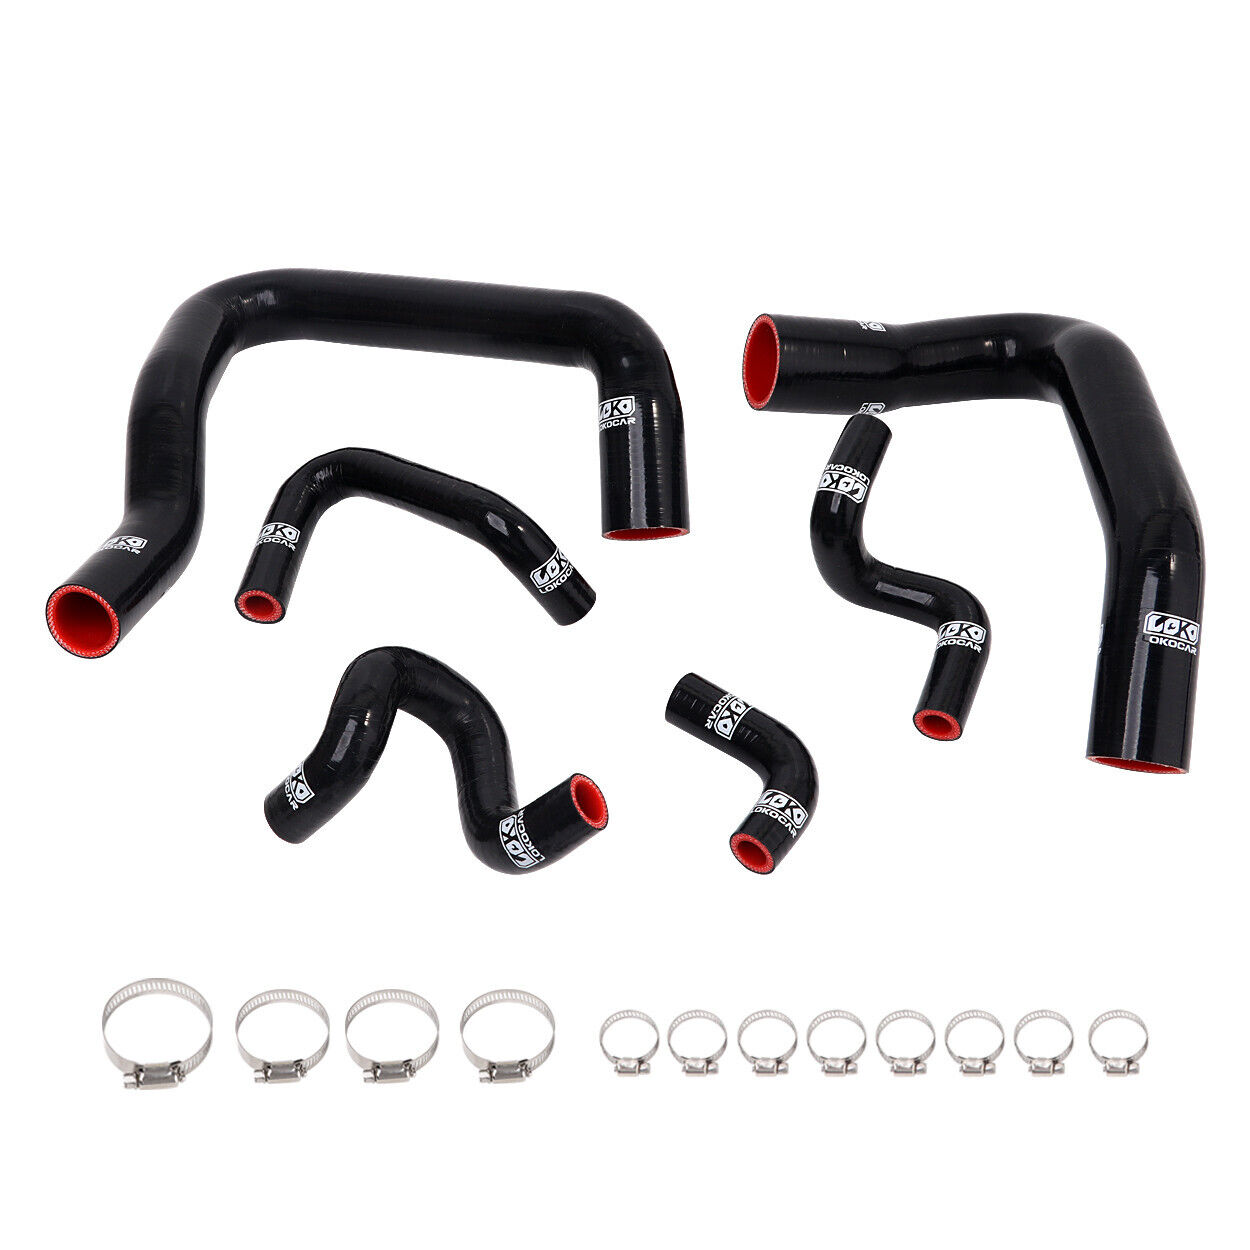 Silicone Radiator Hose Piping Kit Fits For 1986-1993 Mustang GT LX Cobra Black